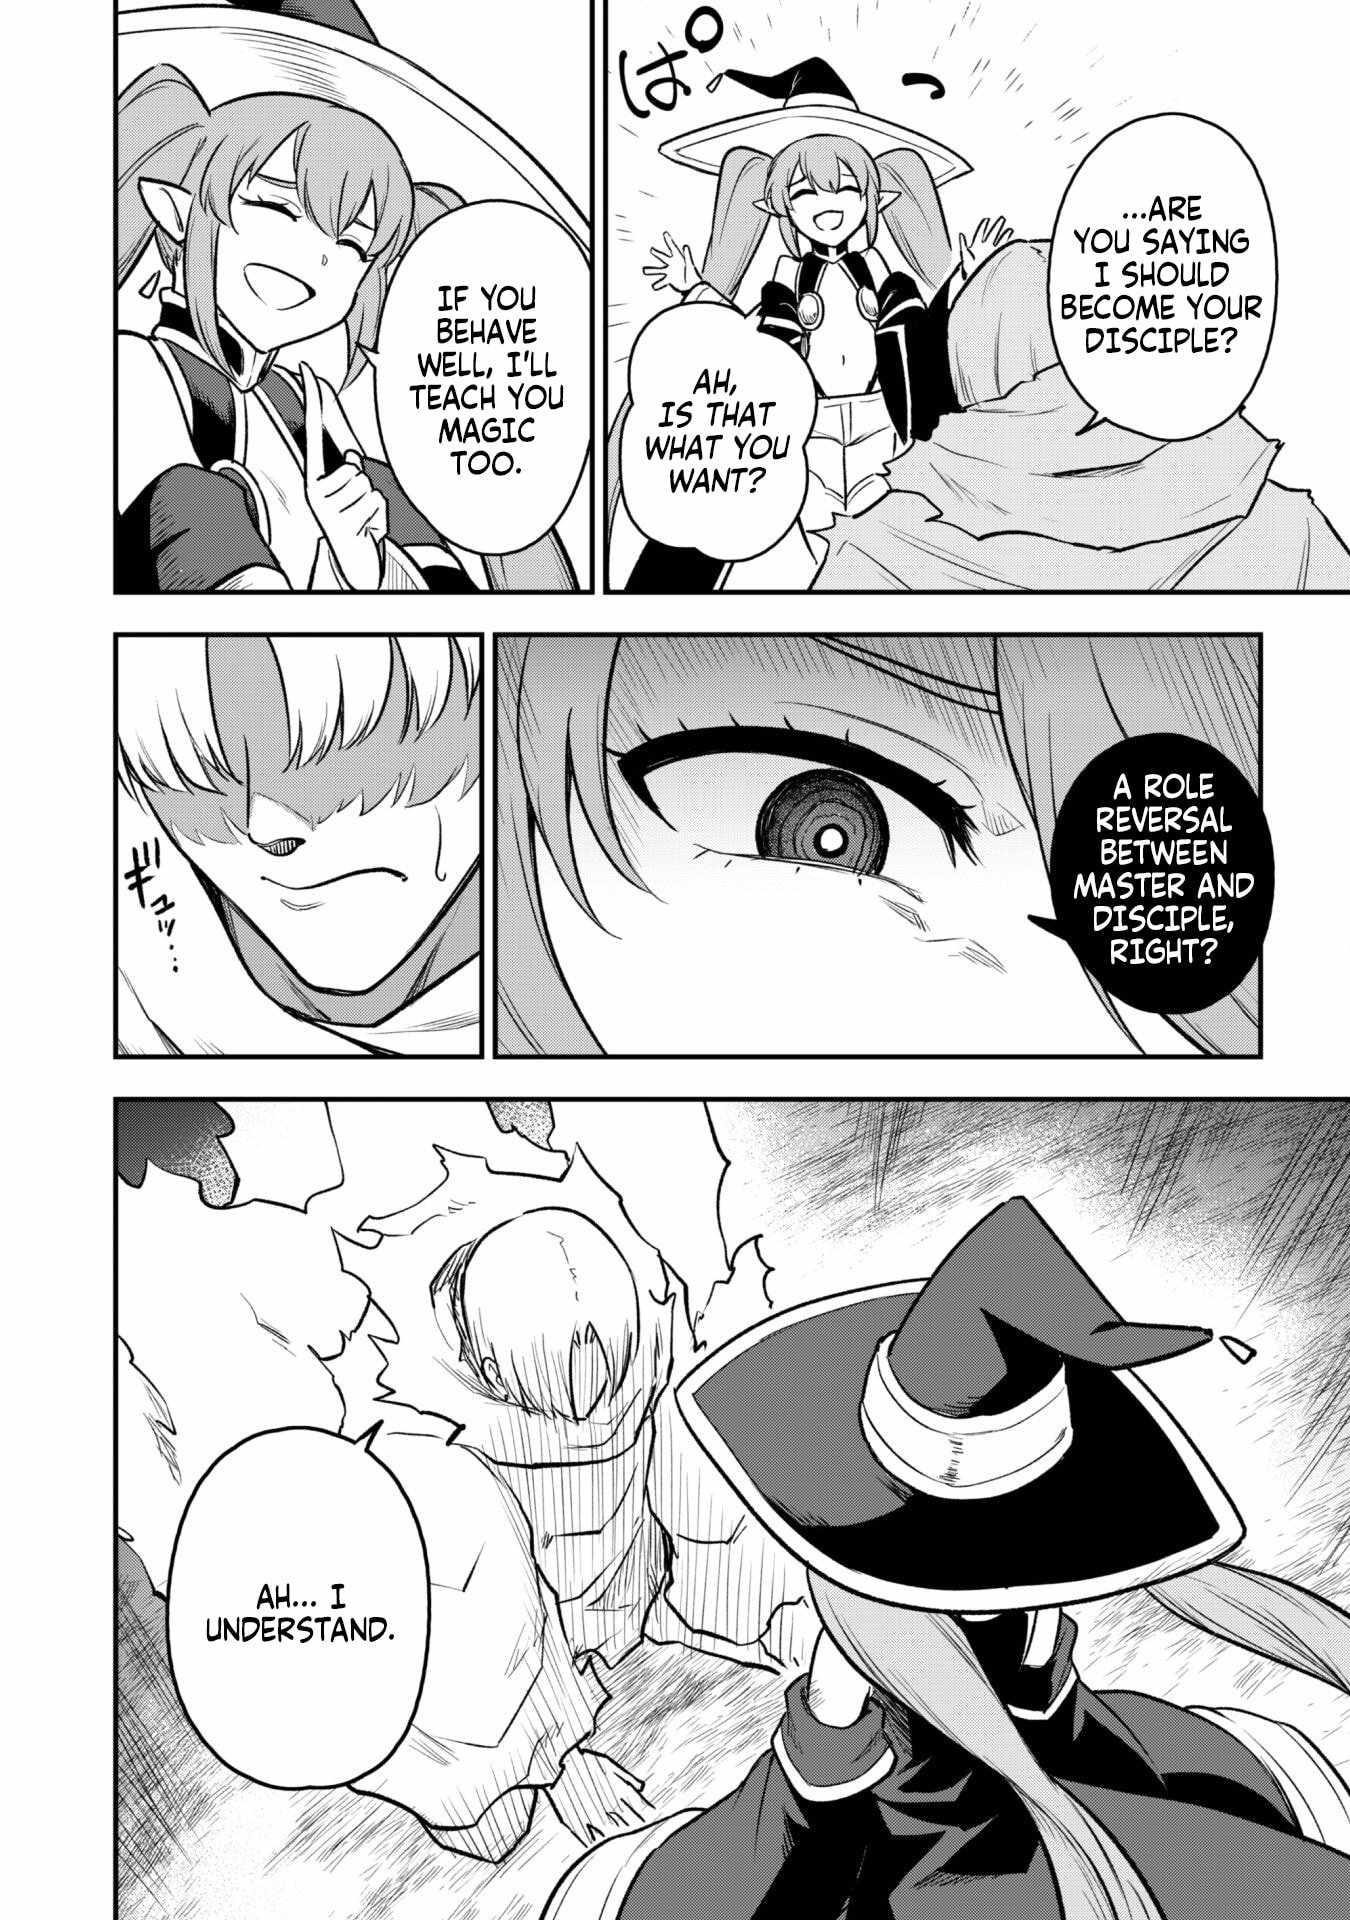 The White Mage Who Joined My Party Is a Circle Crusher, So My Isekai Life Is at Risk of Collapsing Once Again Chapter 12-1-eng-li - Page 9